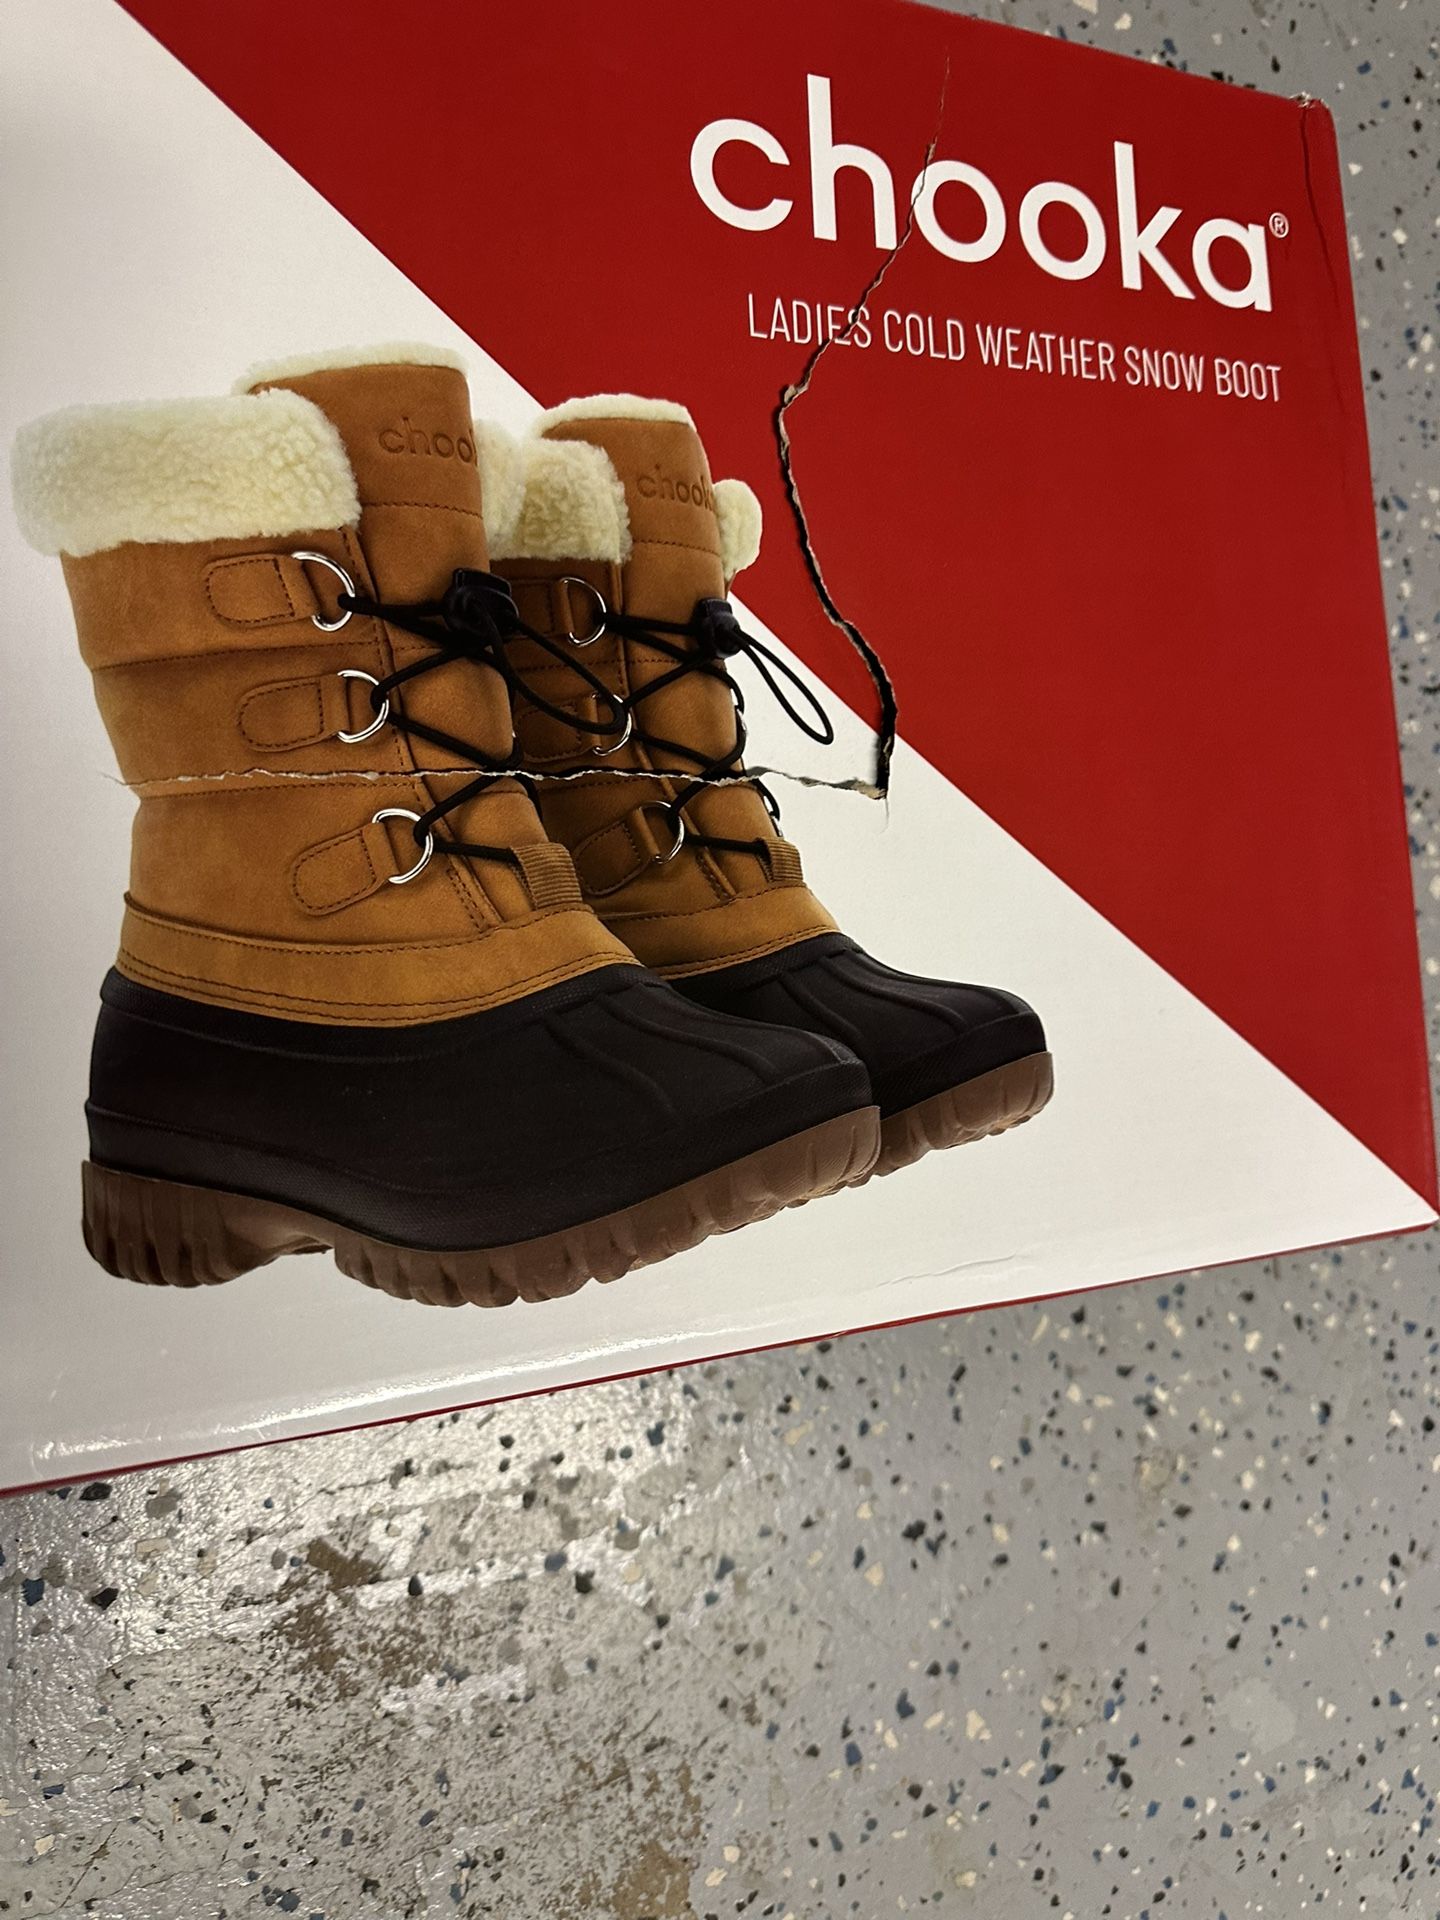 New Chooka Cold Weather Snow Boots, Women's Size 8” NEW IN BOX